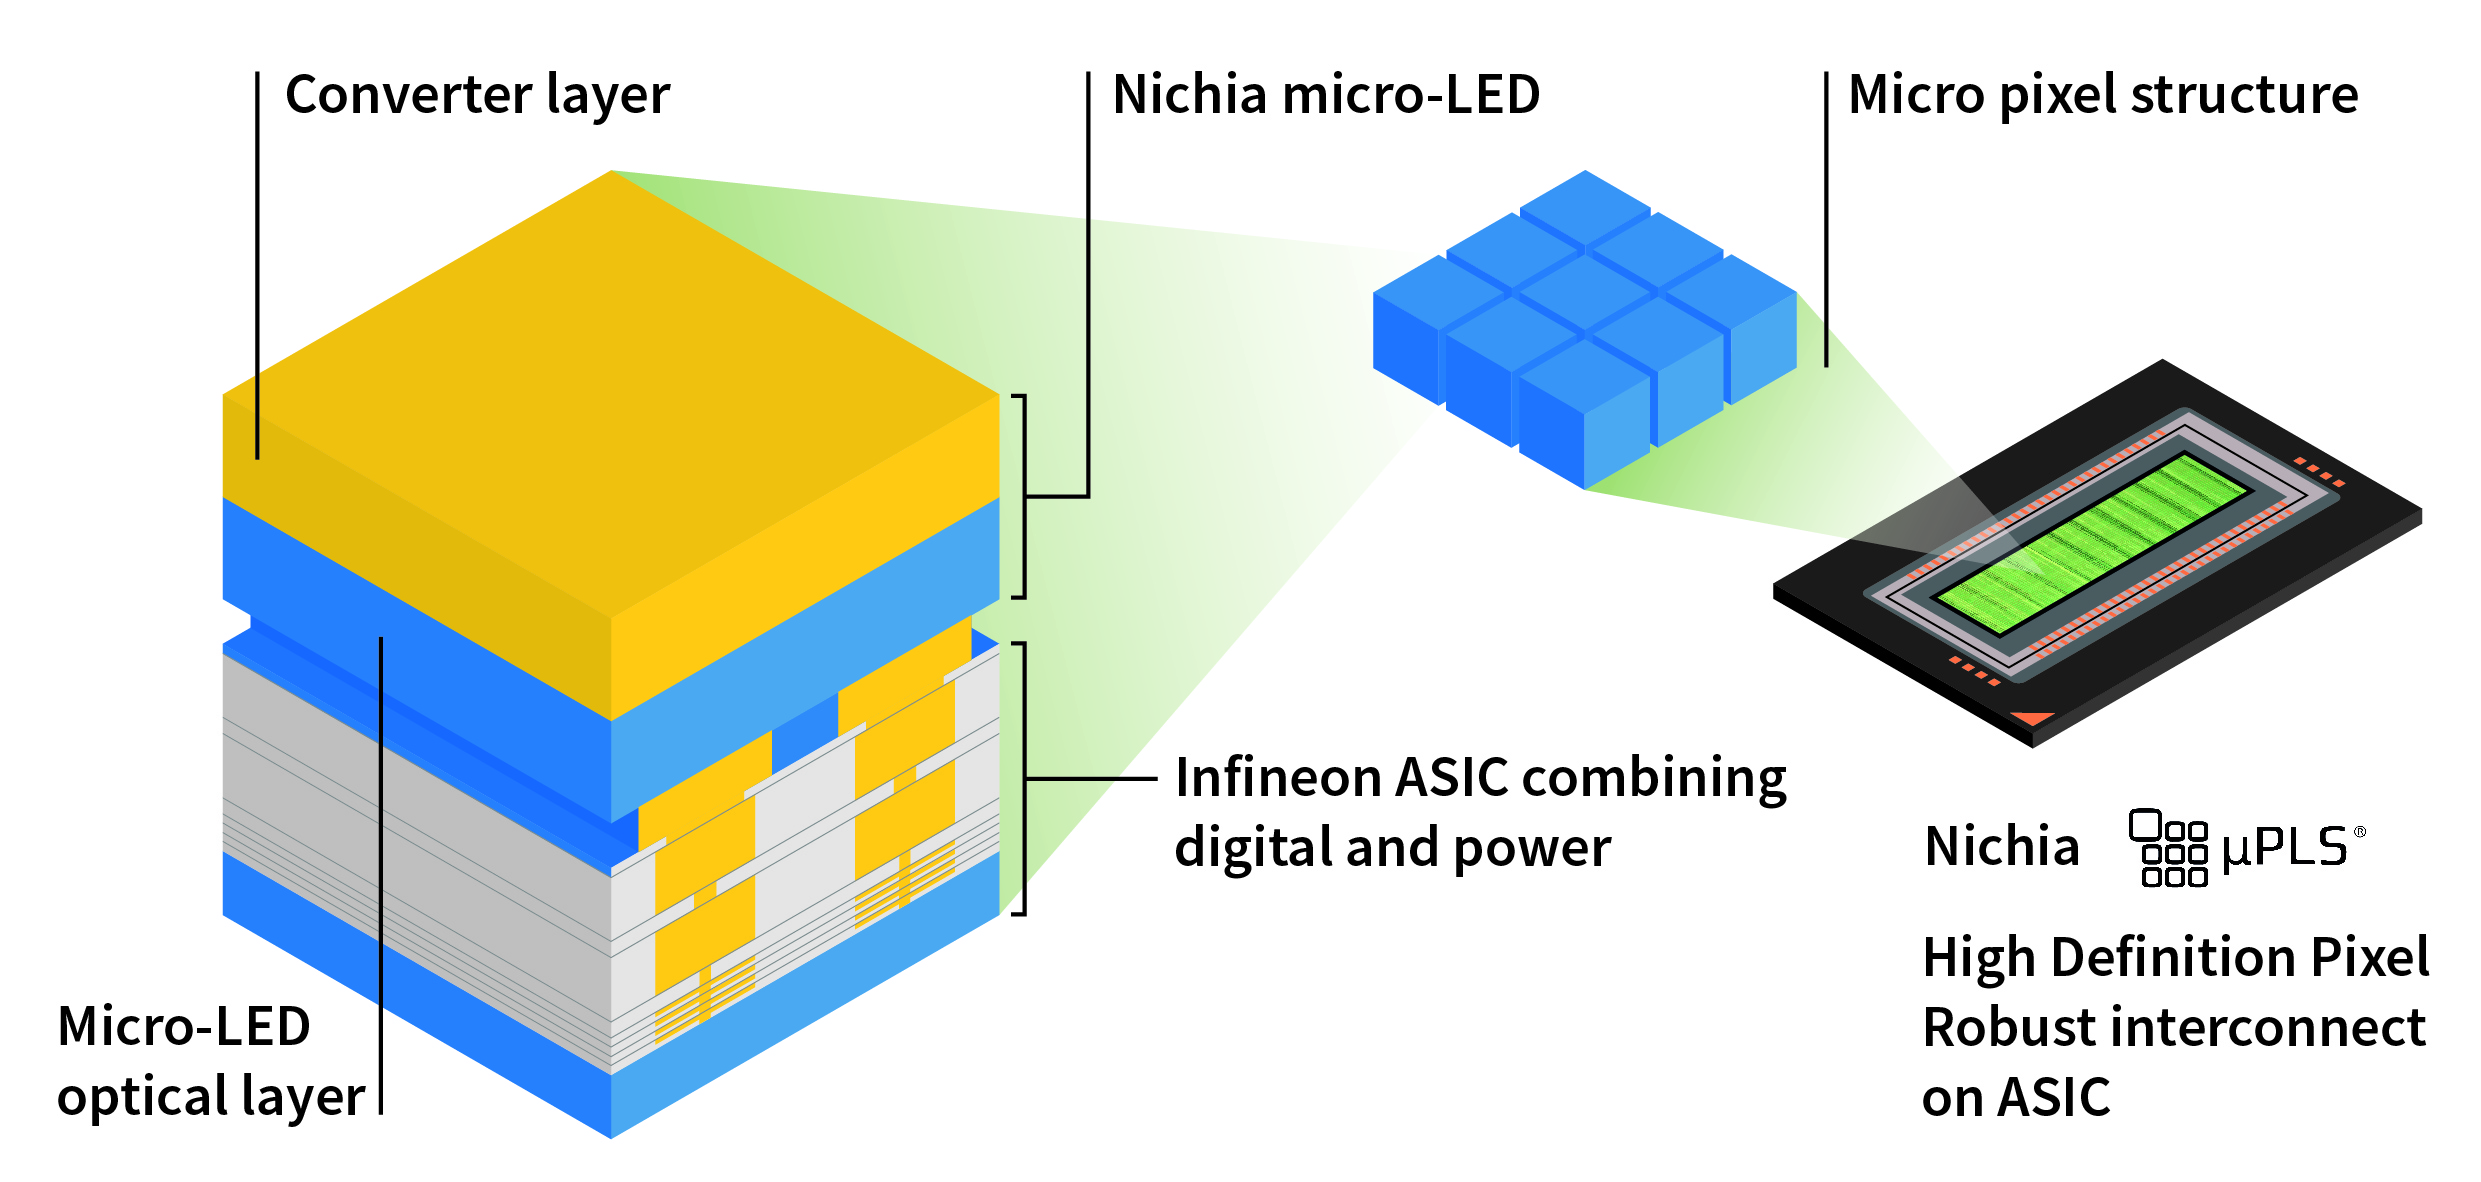 The new 16,384 pixel µPLS™ micro-Pixelated Light Solution from Nichia and Infineon combines high-definition resolution with industry’s highest light output. This solution enables a new automotive lighting experience by providing four-times wider field-of-view with significantly higher light output than any other current micro-mirror based HD matrix-light solution. The advanced HD light can warn drivers of hazards by highlighting people or objects, project markings on the road to guide the driver through a construction site or intersection, and offer glare-free high beam or bending light. This takes the driver’s road safety and driving comfort to a new level.